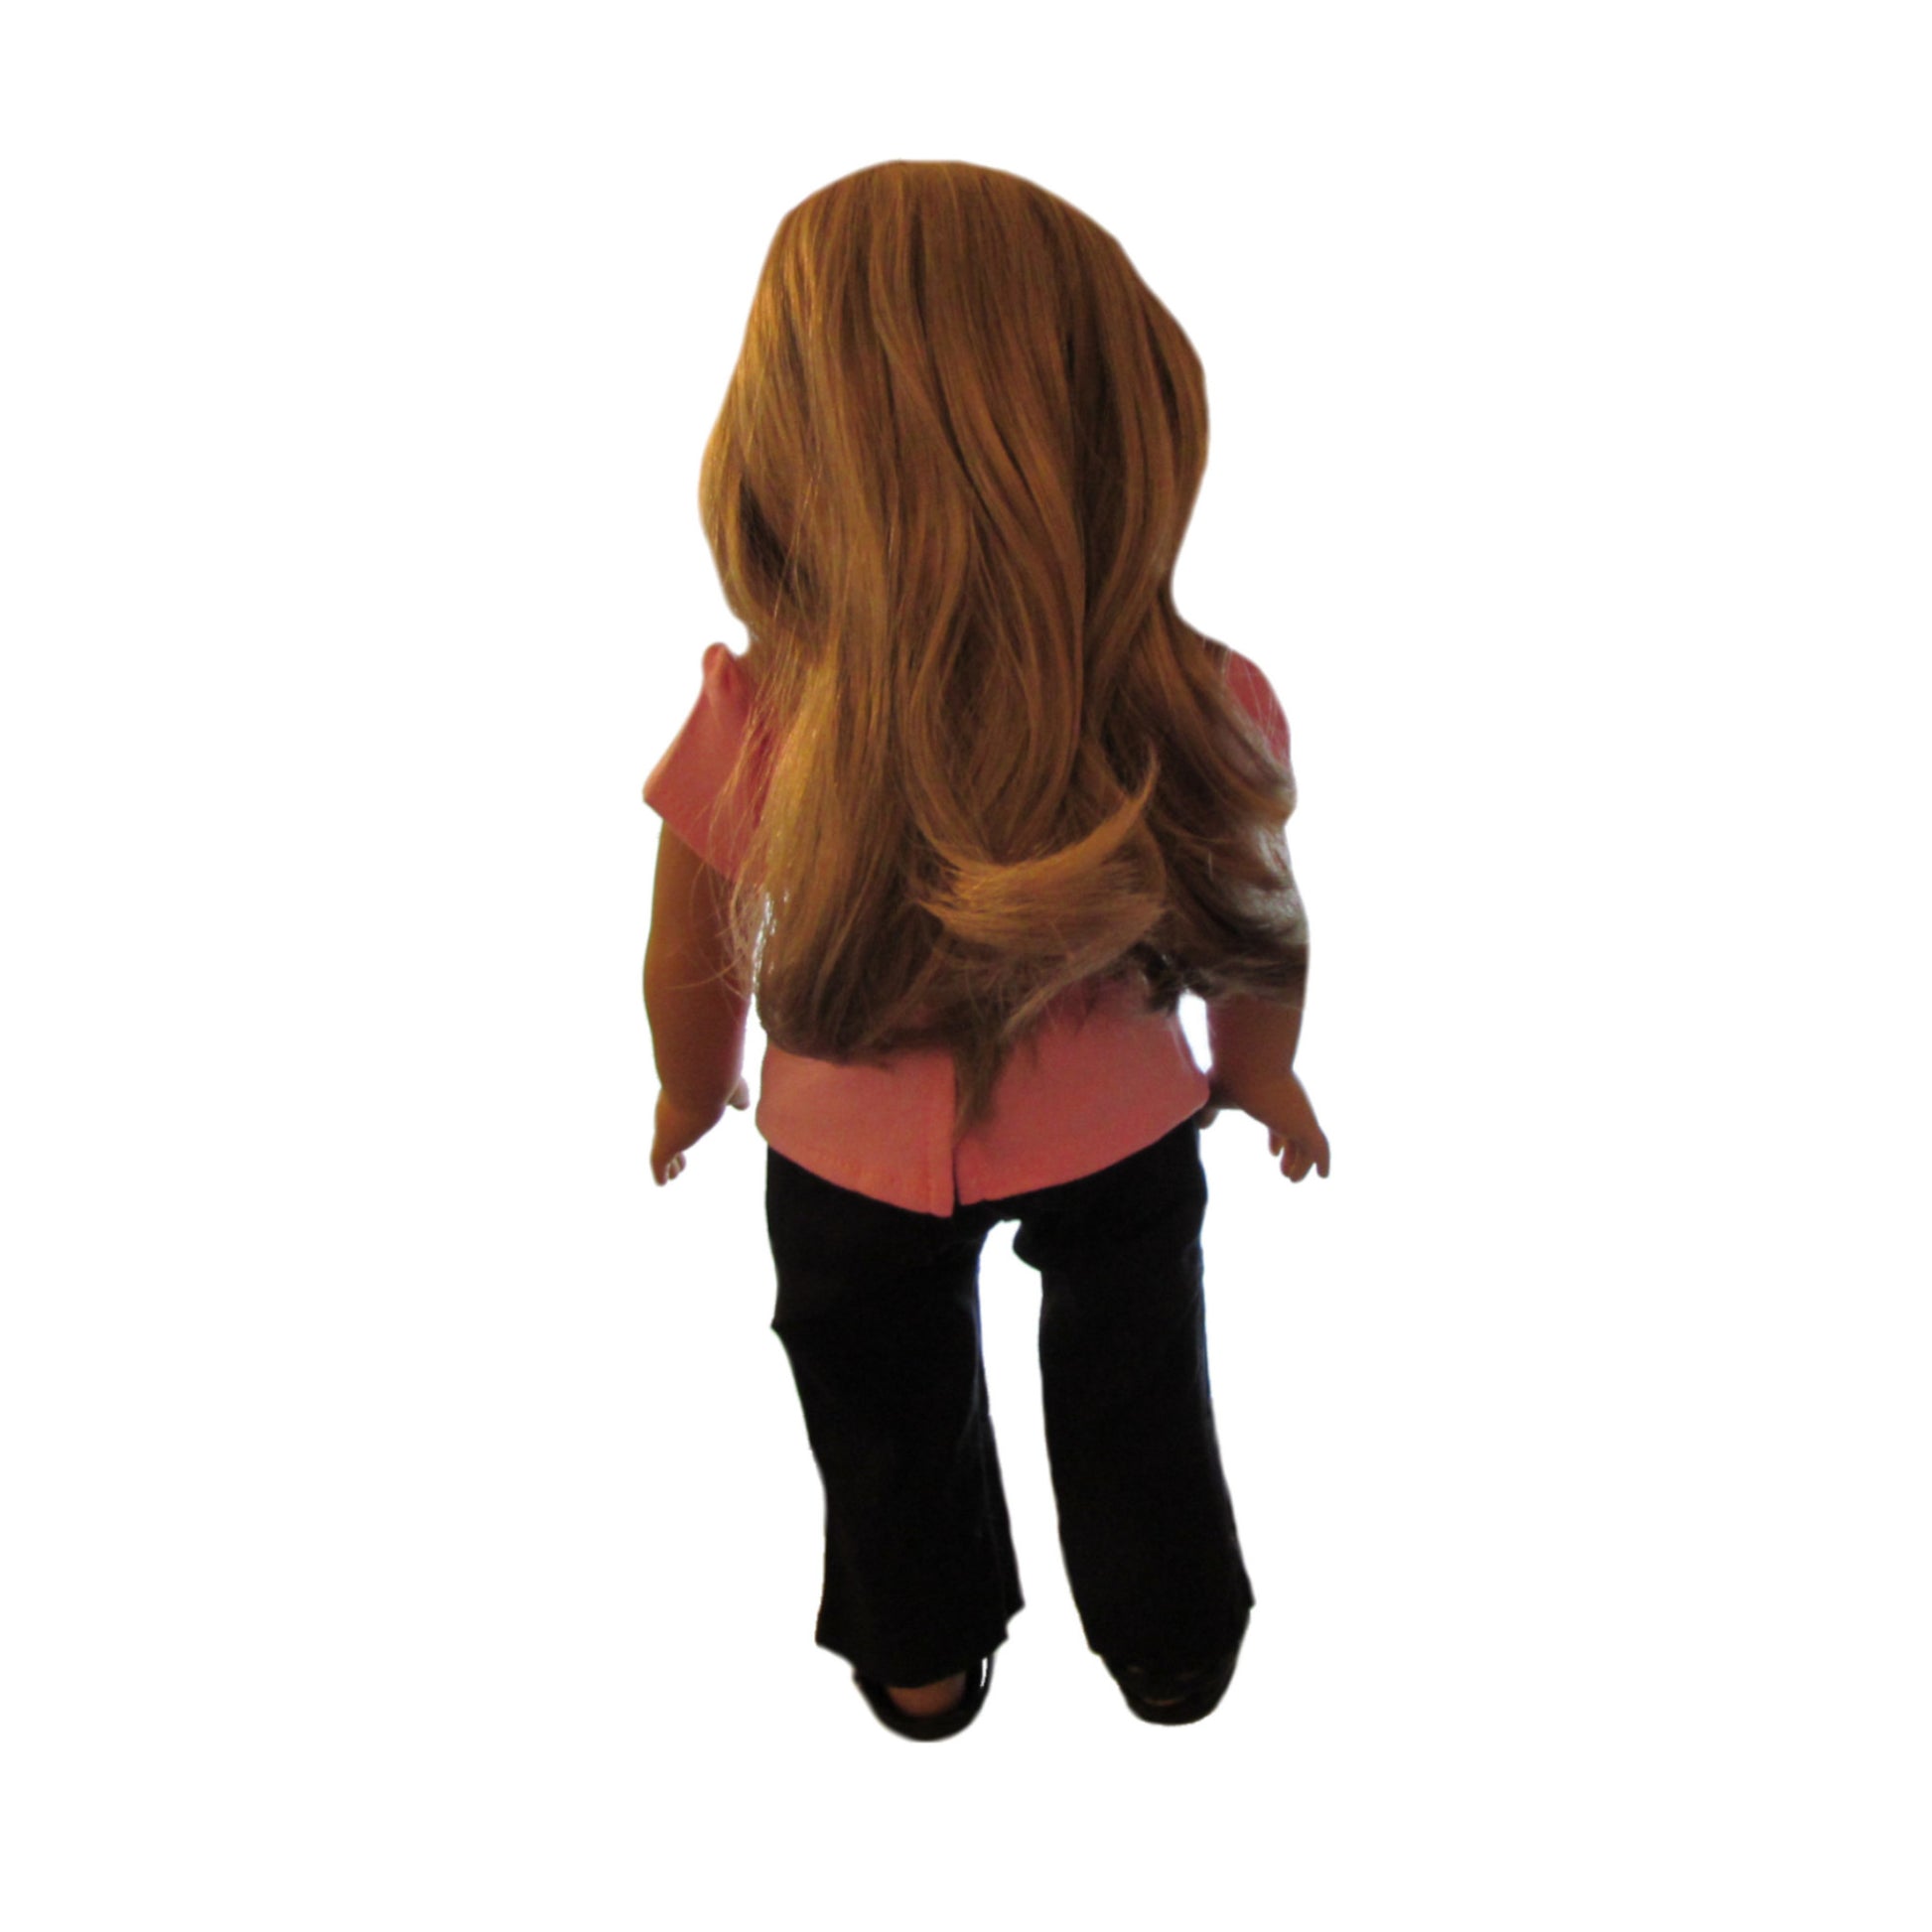 Pink Doll Top and Black Pants Outfit for 18-inch dolls